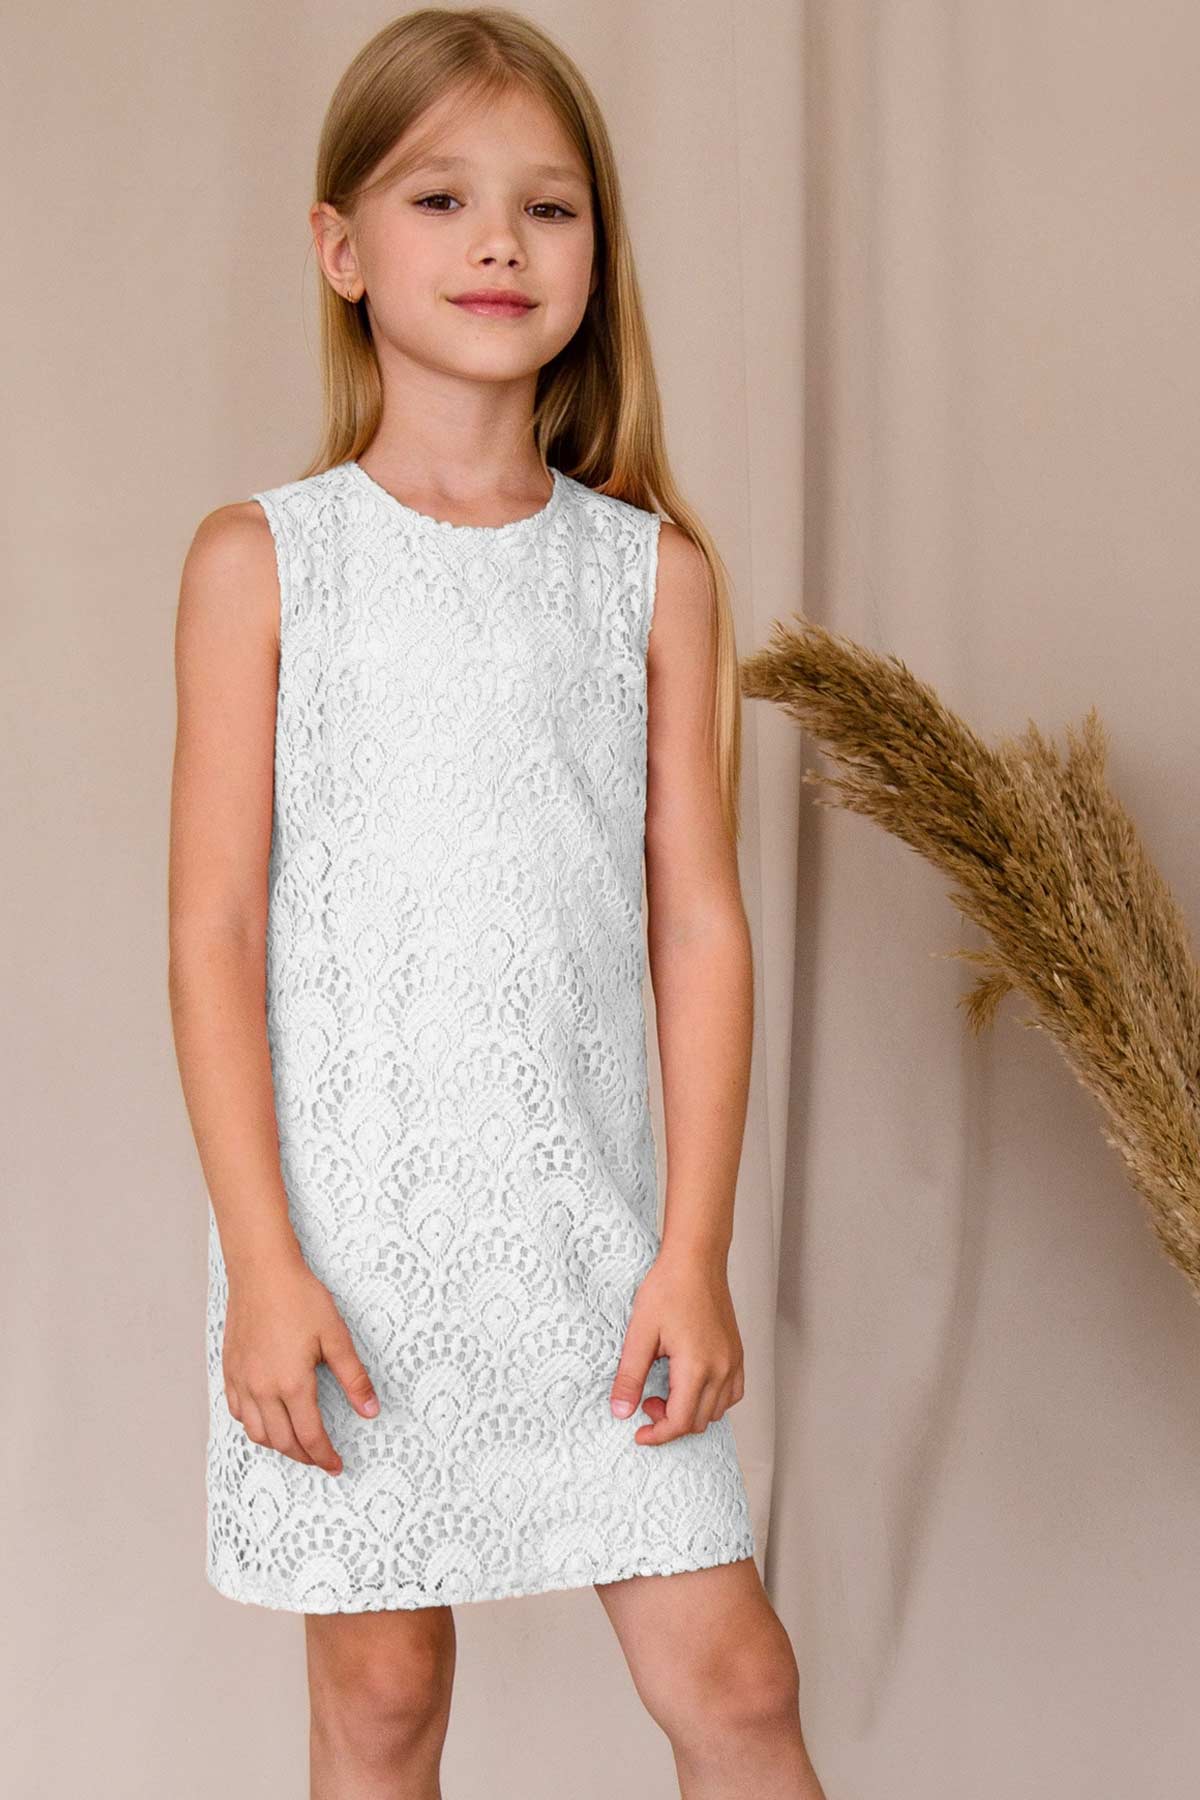 White Crochet Lace Sleeveless Shift Fancy Cocktail Party Dress - Girls - Pineapple Clothing